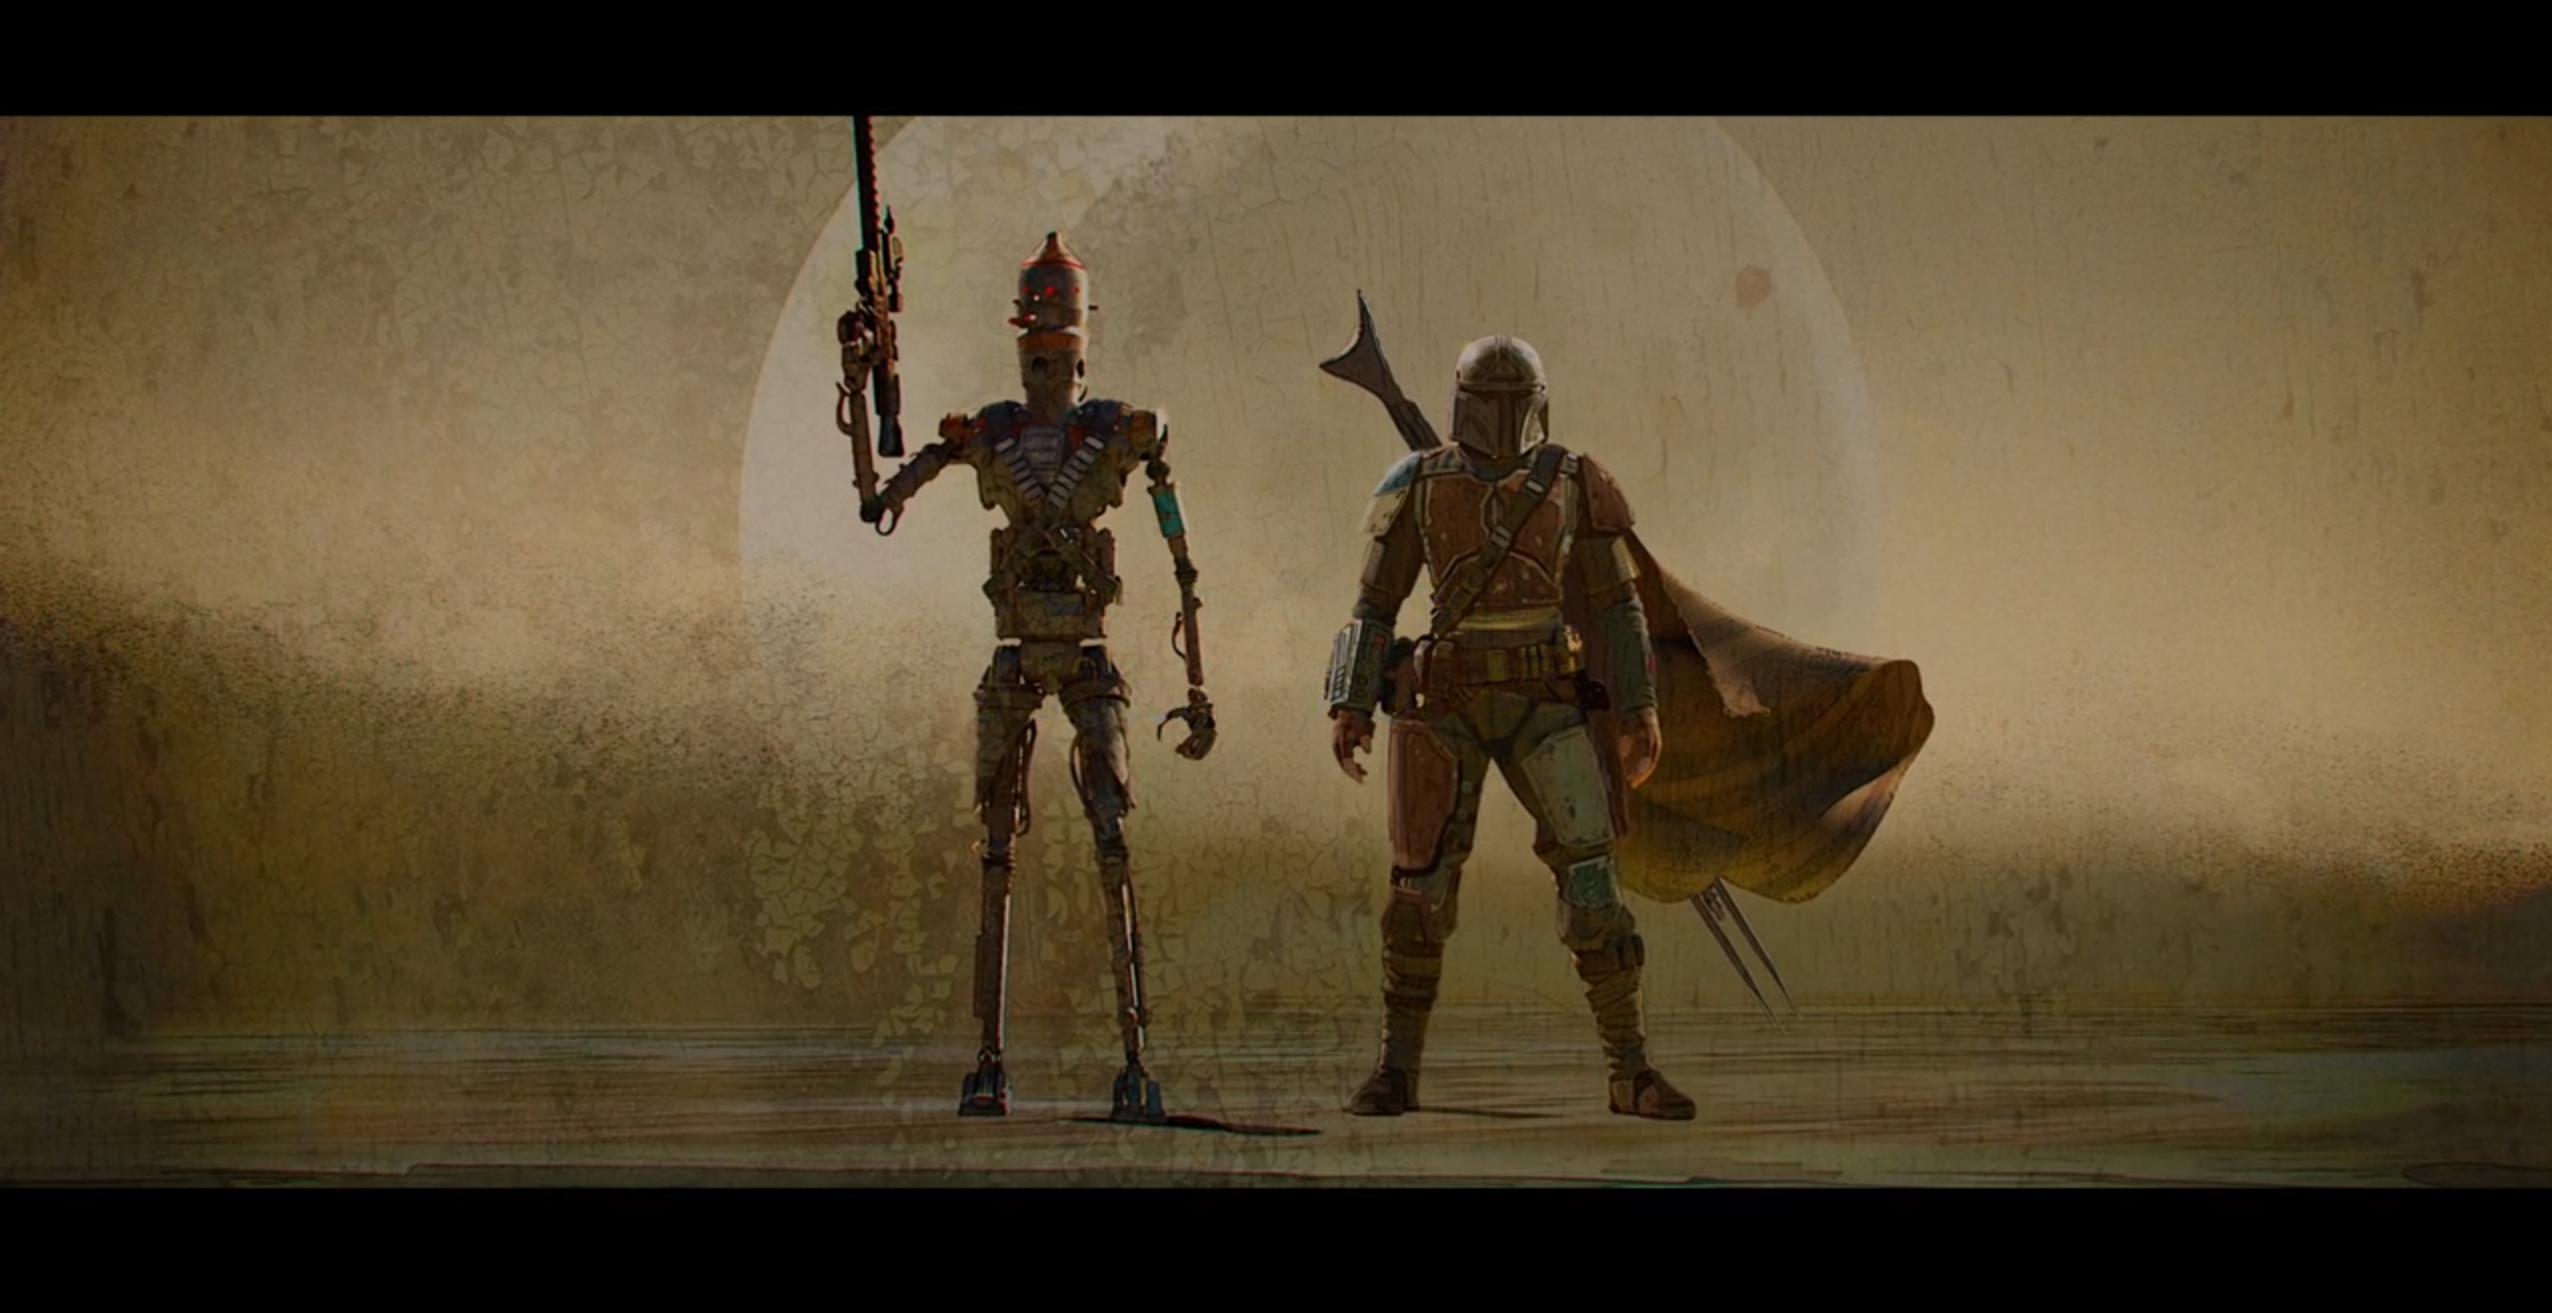 The Mandalorian wallpaper. The show is a fantastic start to what I feel will be the best and most faithful Star Wars material we've seen in a very long time